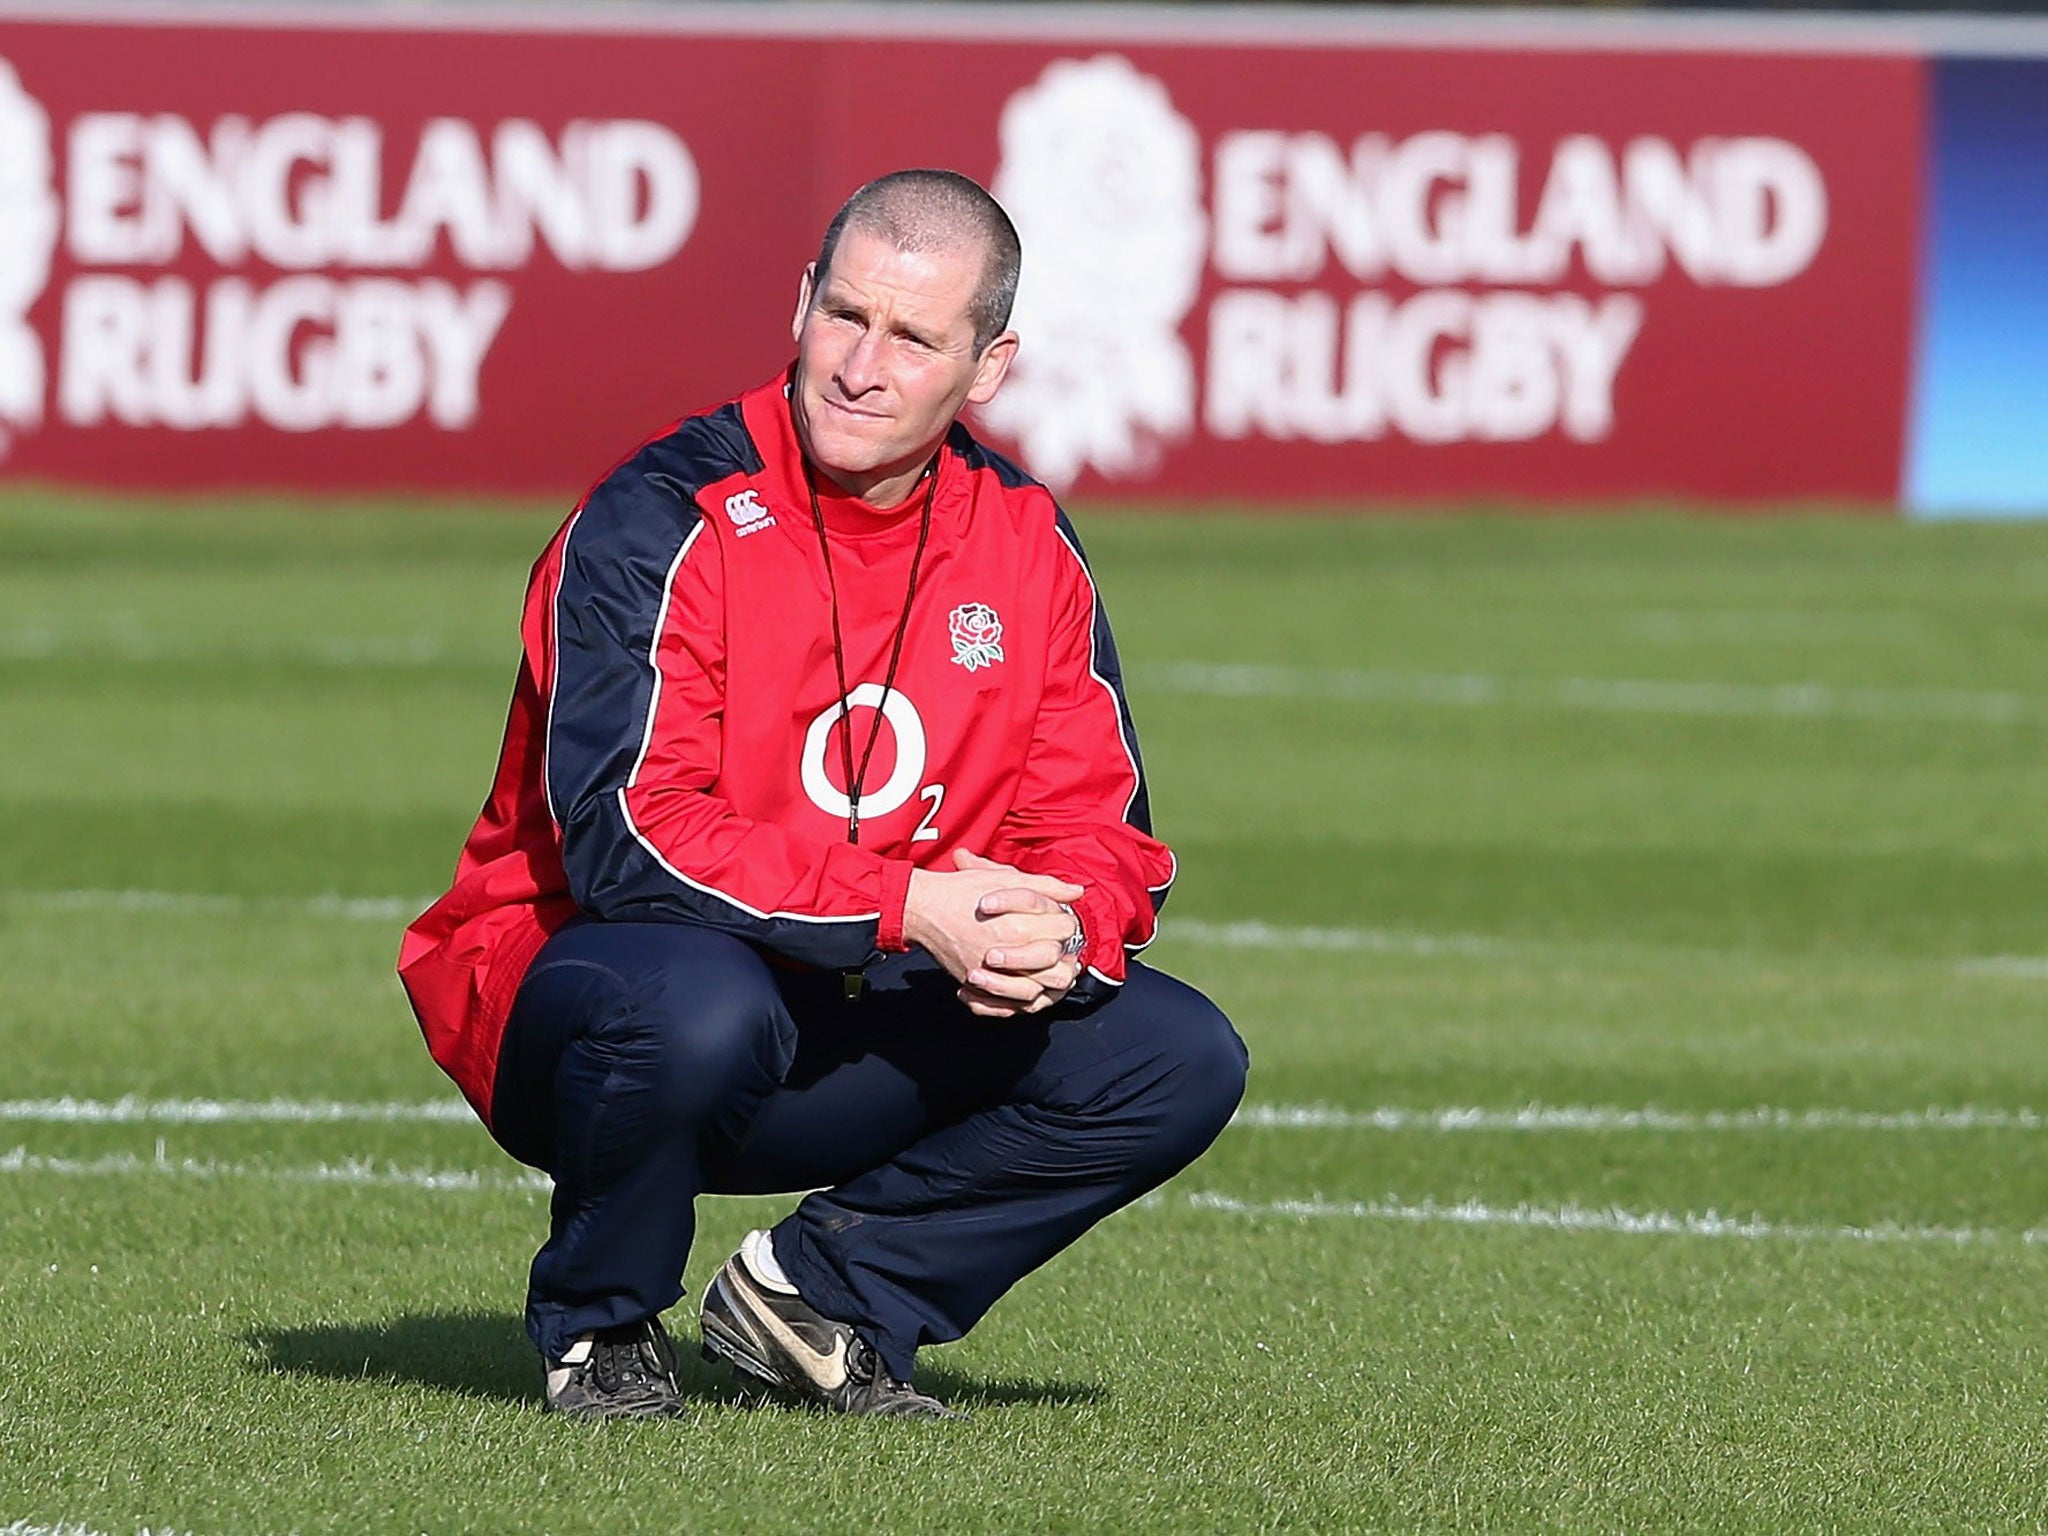 Stuart Lancaster had a “good chat” with his Lions counterpart